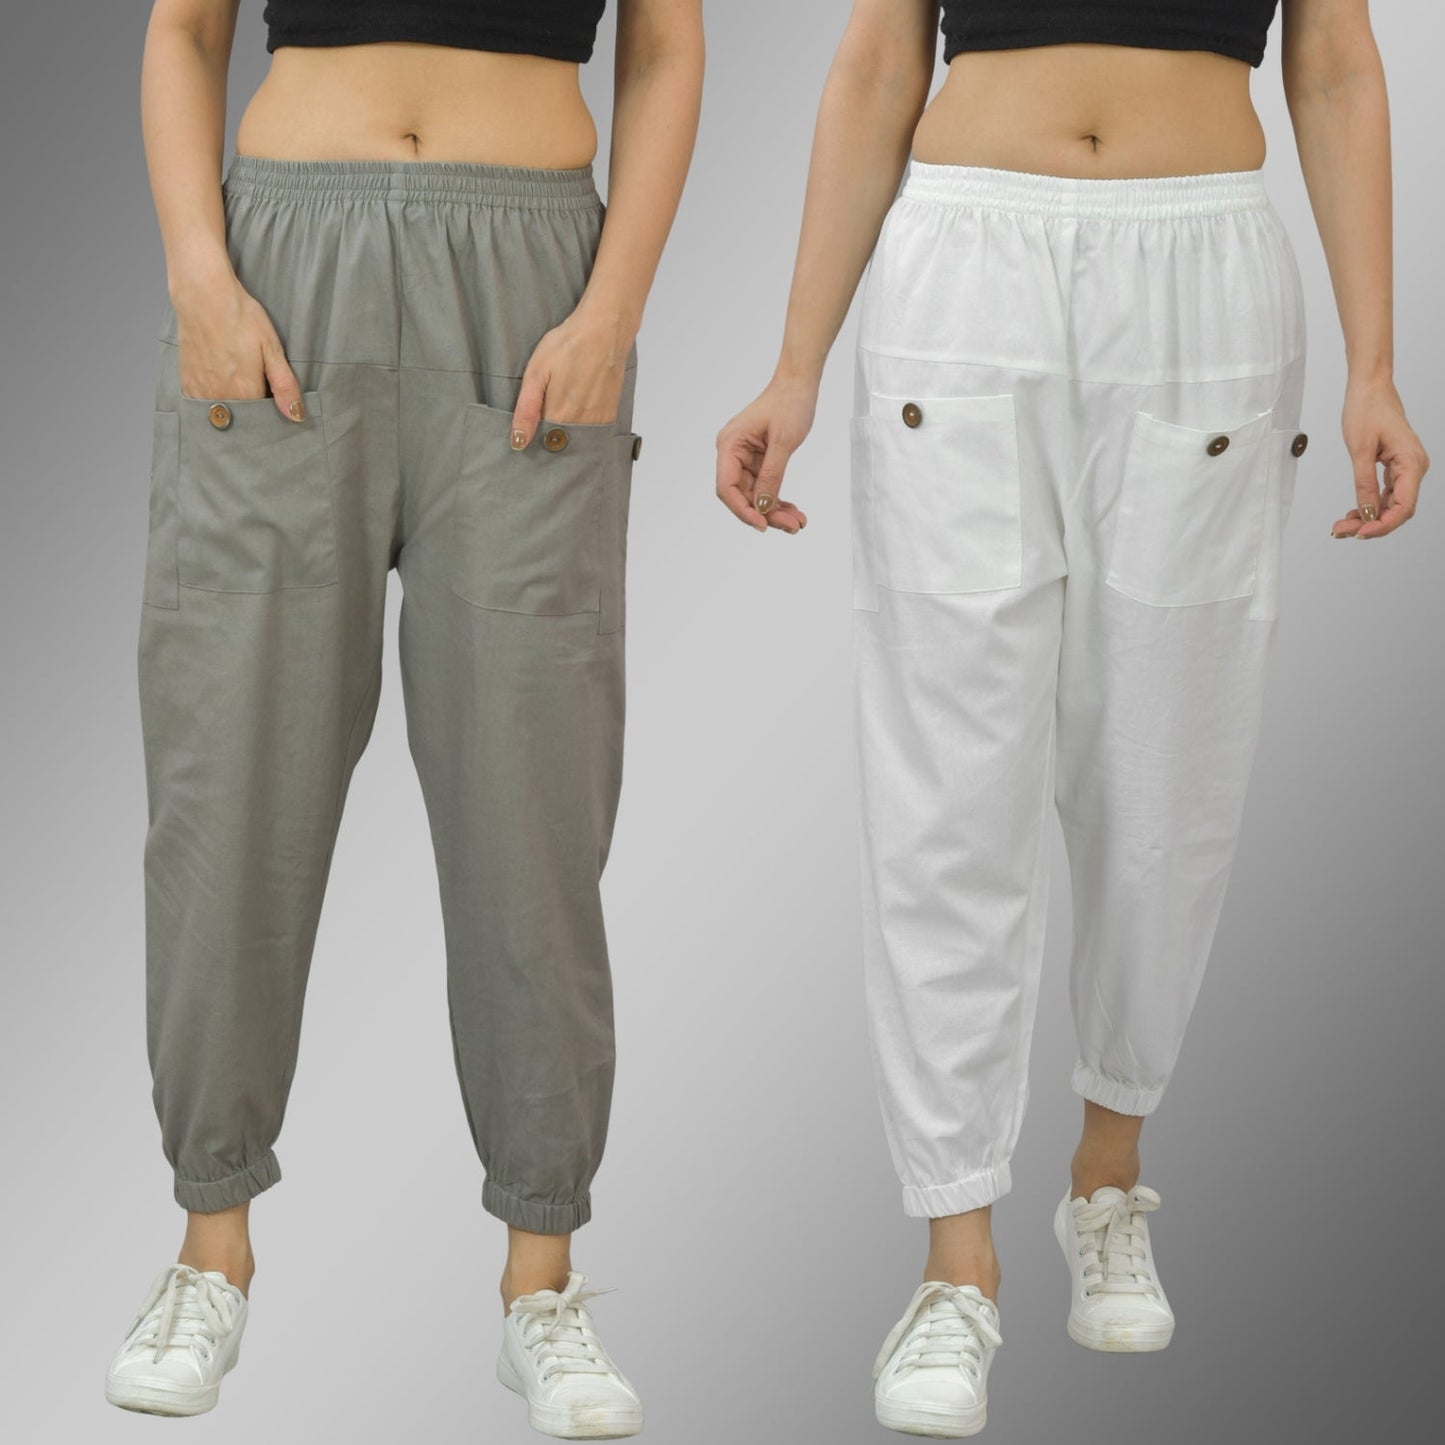 Combo Pack Of Womens Grey And White Four Pocket Cotton Cargo Pants